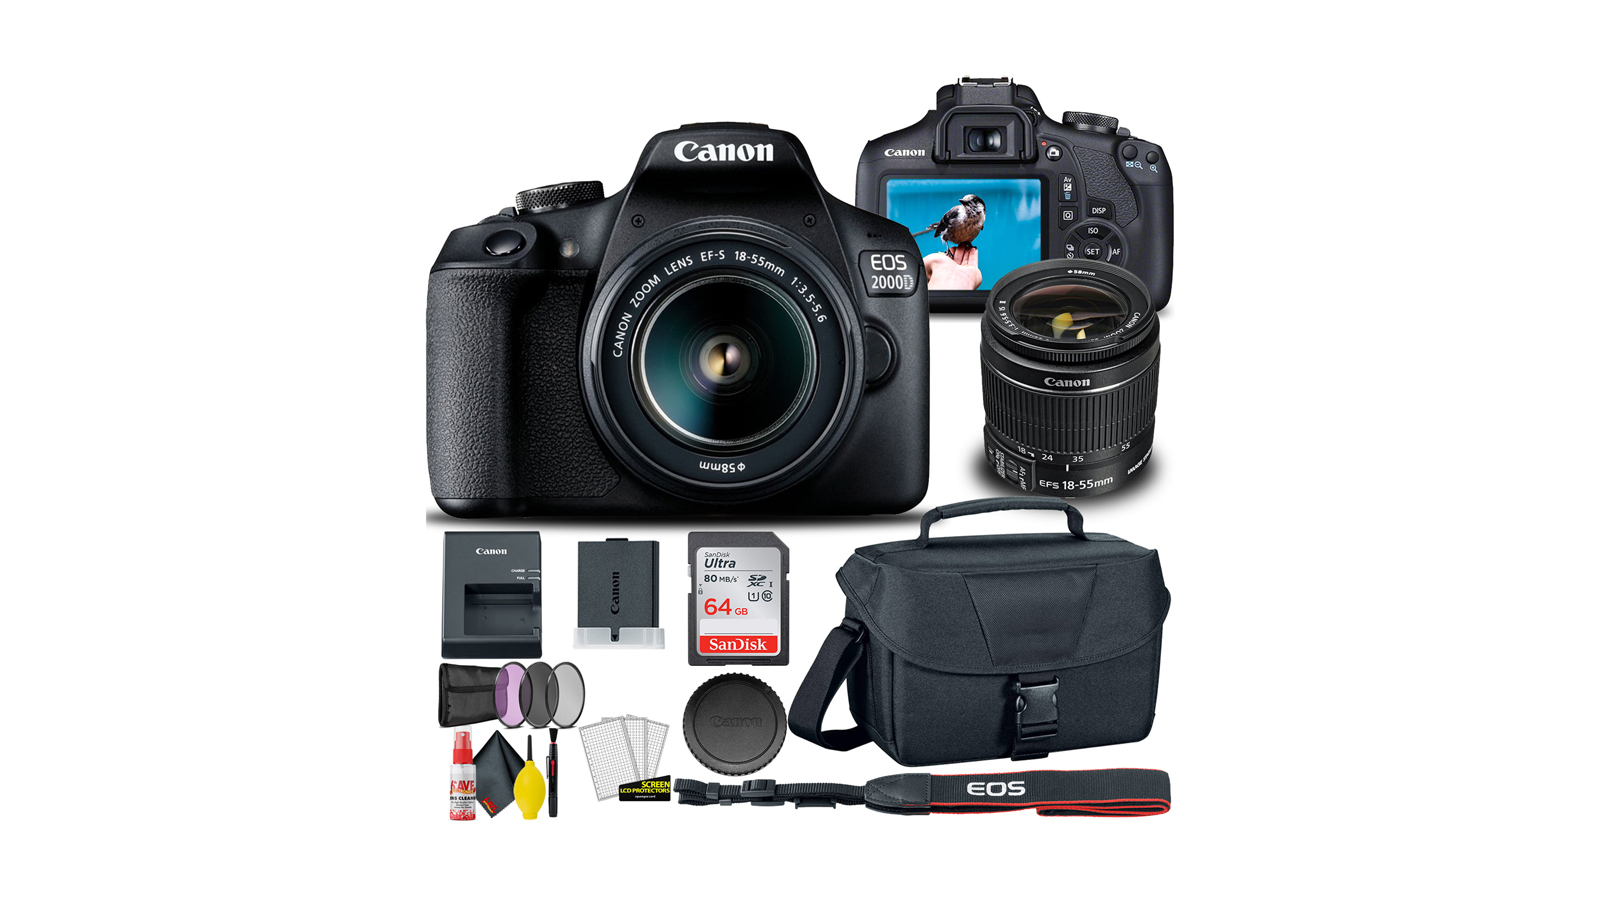 Canon EOS 2000D / Rebel T7 DSLR Camera with 18-55mm Lens + Creative Kit